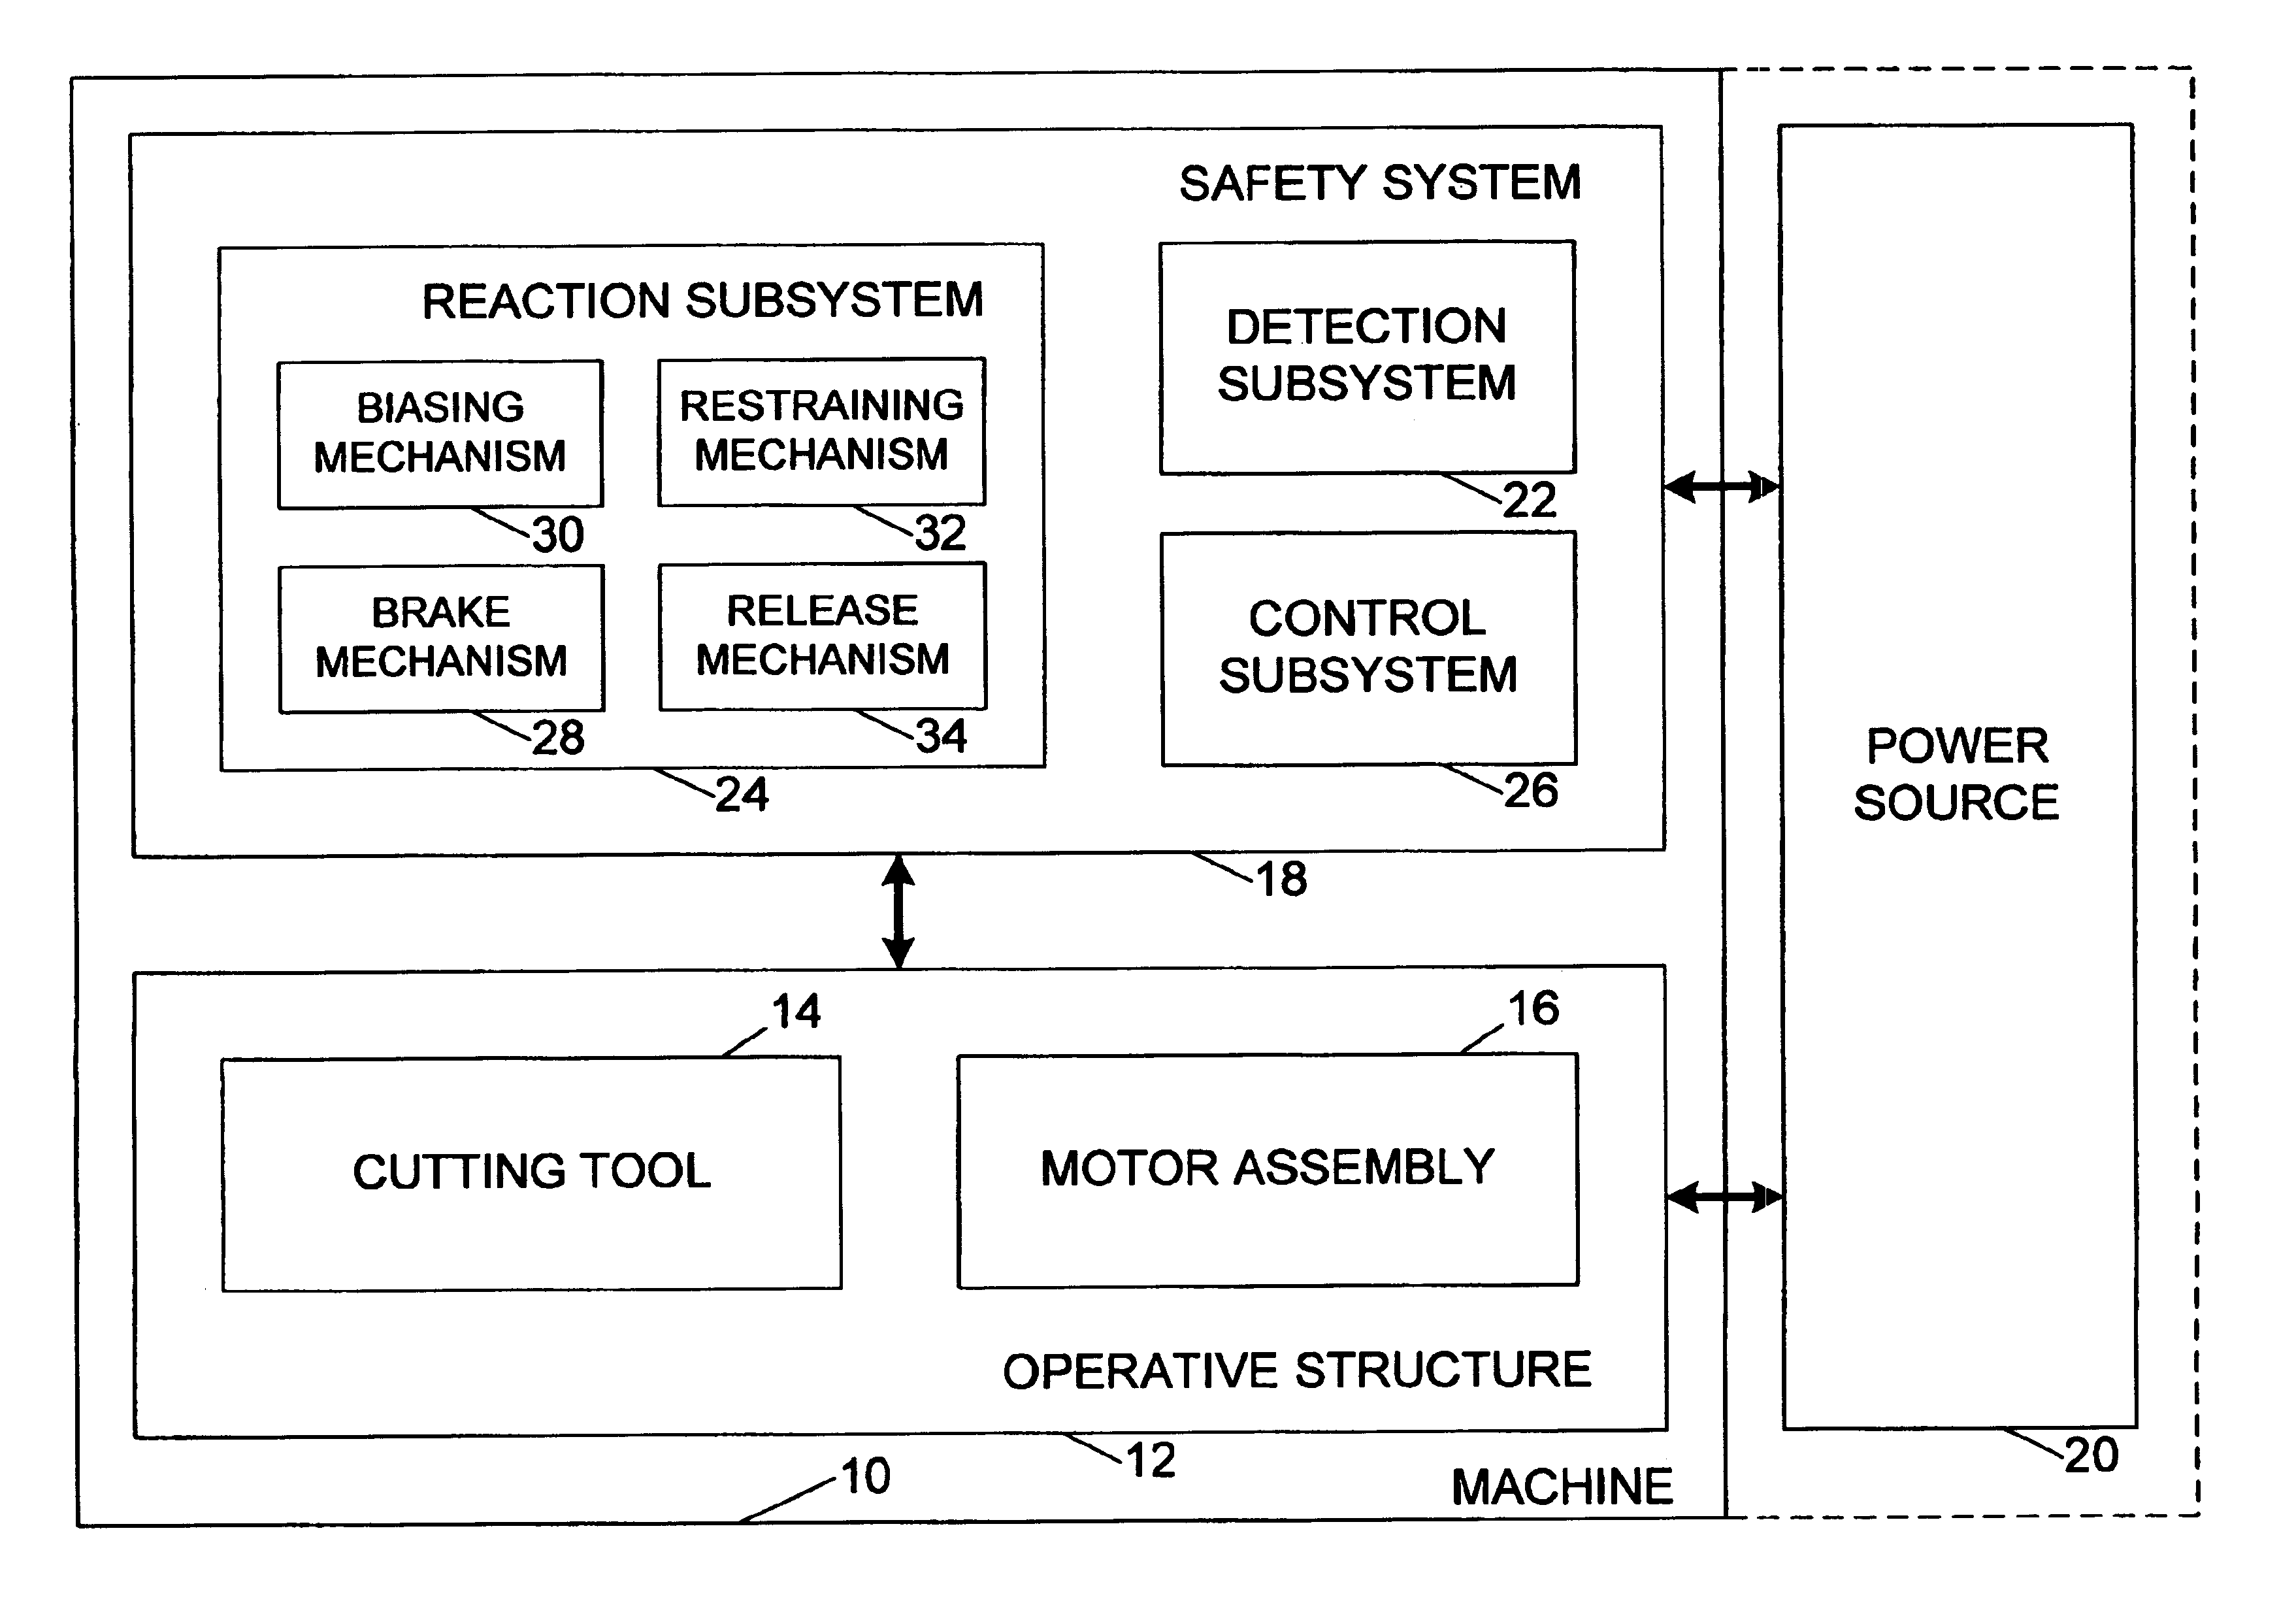 Actuators for use in fast-acting safety systems